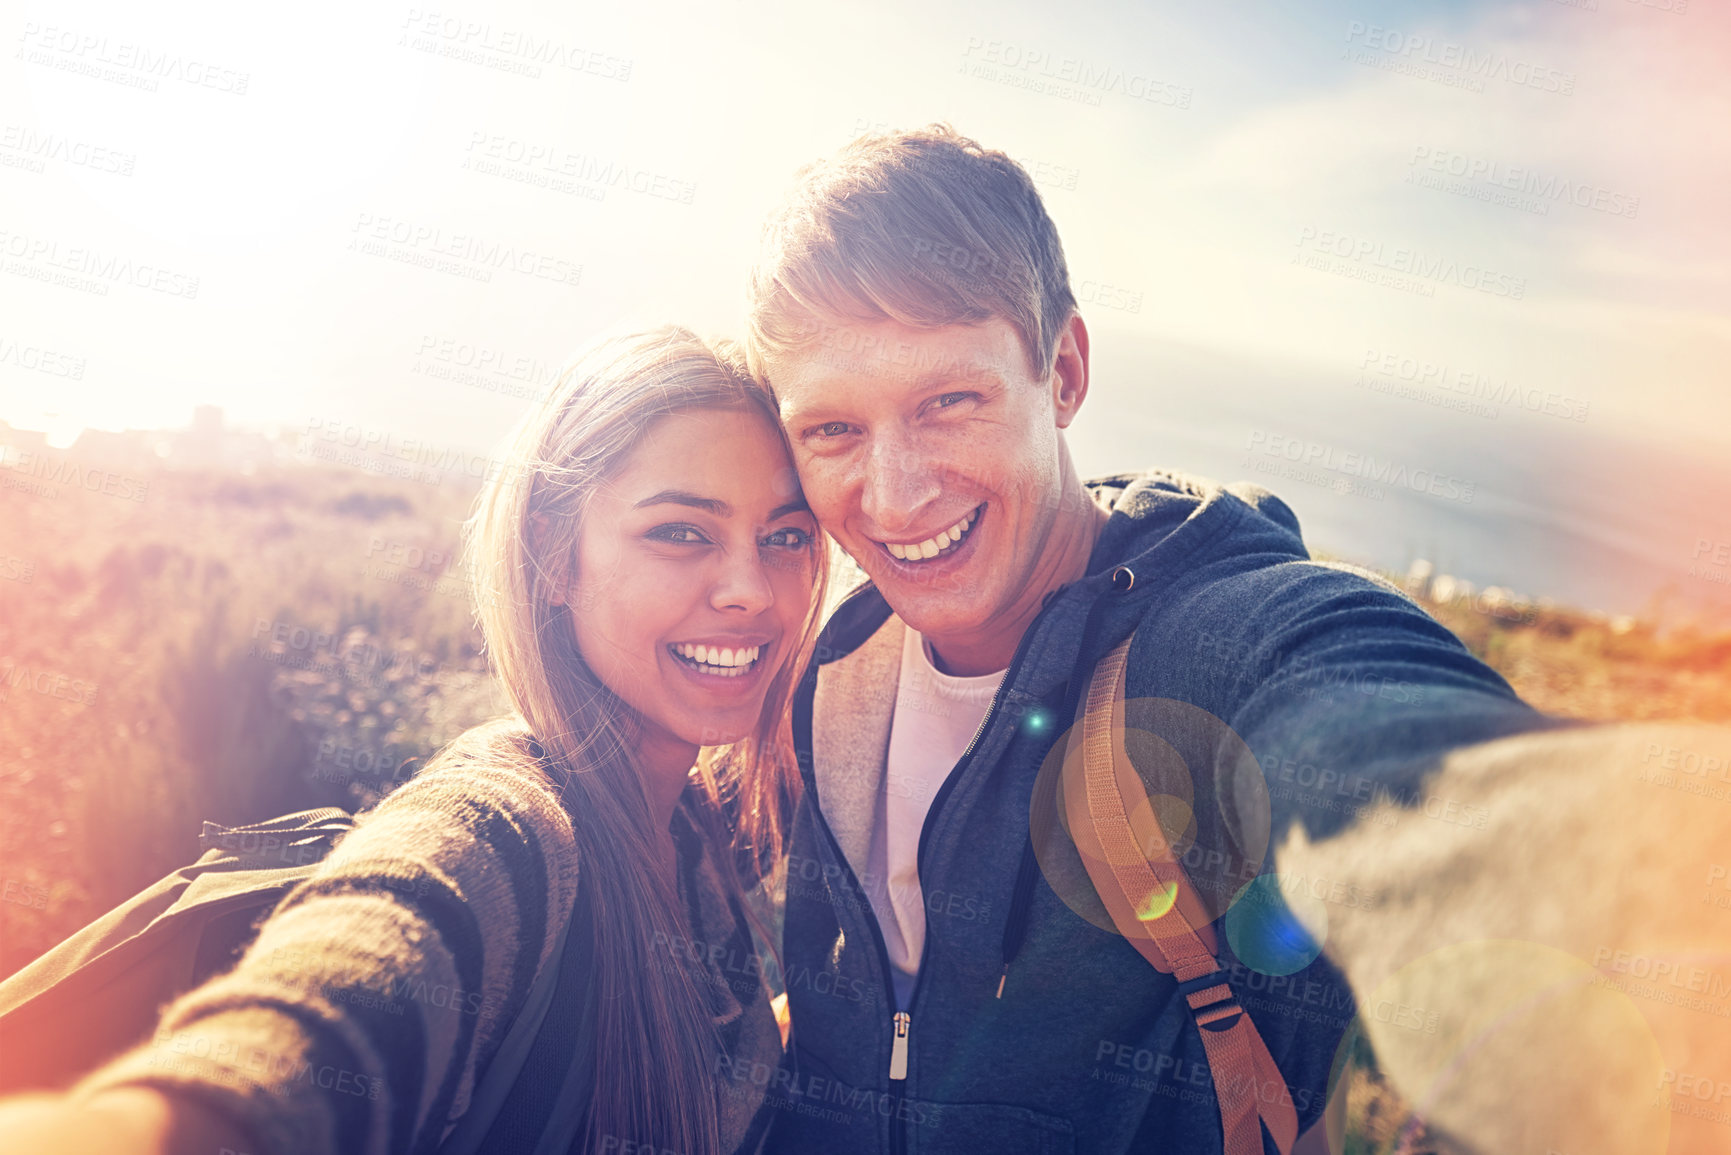 Buy stock photo Hiking, selfie and couple hug in nature with love, trust and bonding outdoor together. Backpack, travel or people portrait in countryside for adventure, vacation or romantic profile picture at sunset